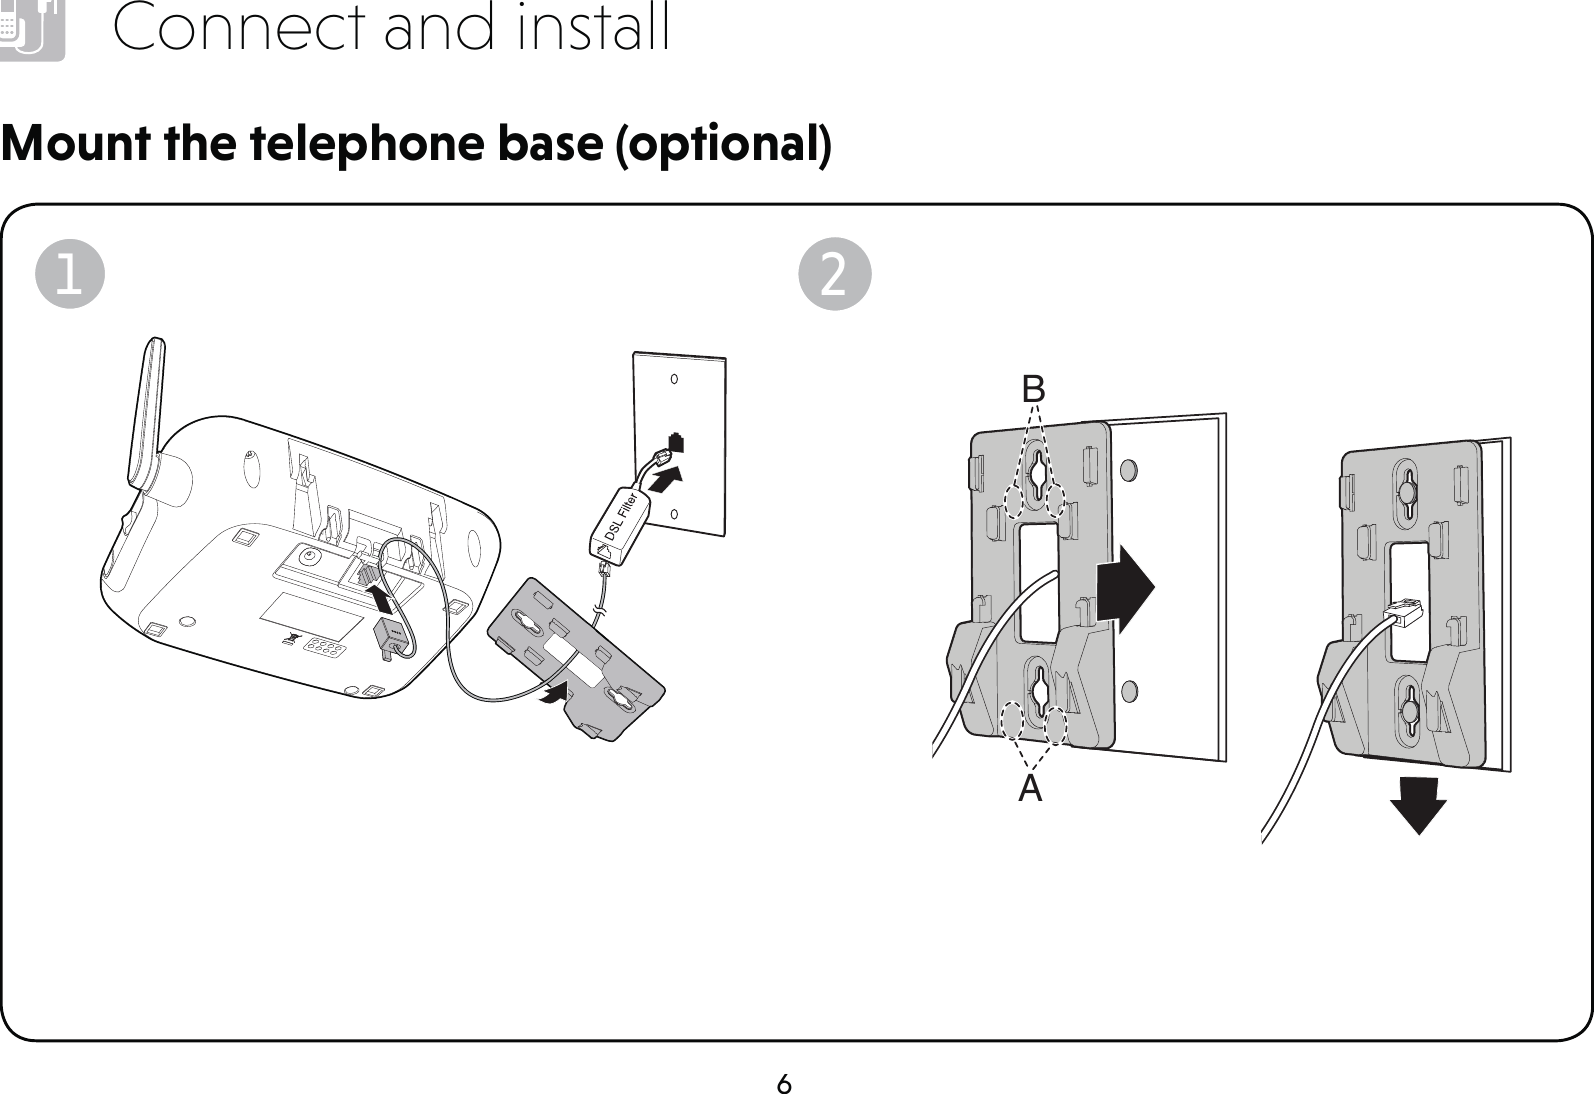 6Connect and installMount the telephone base (optional)BA12